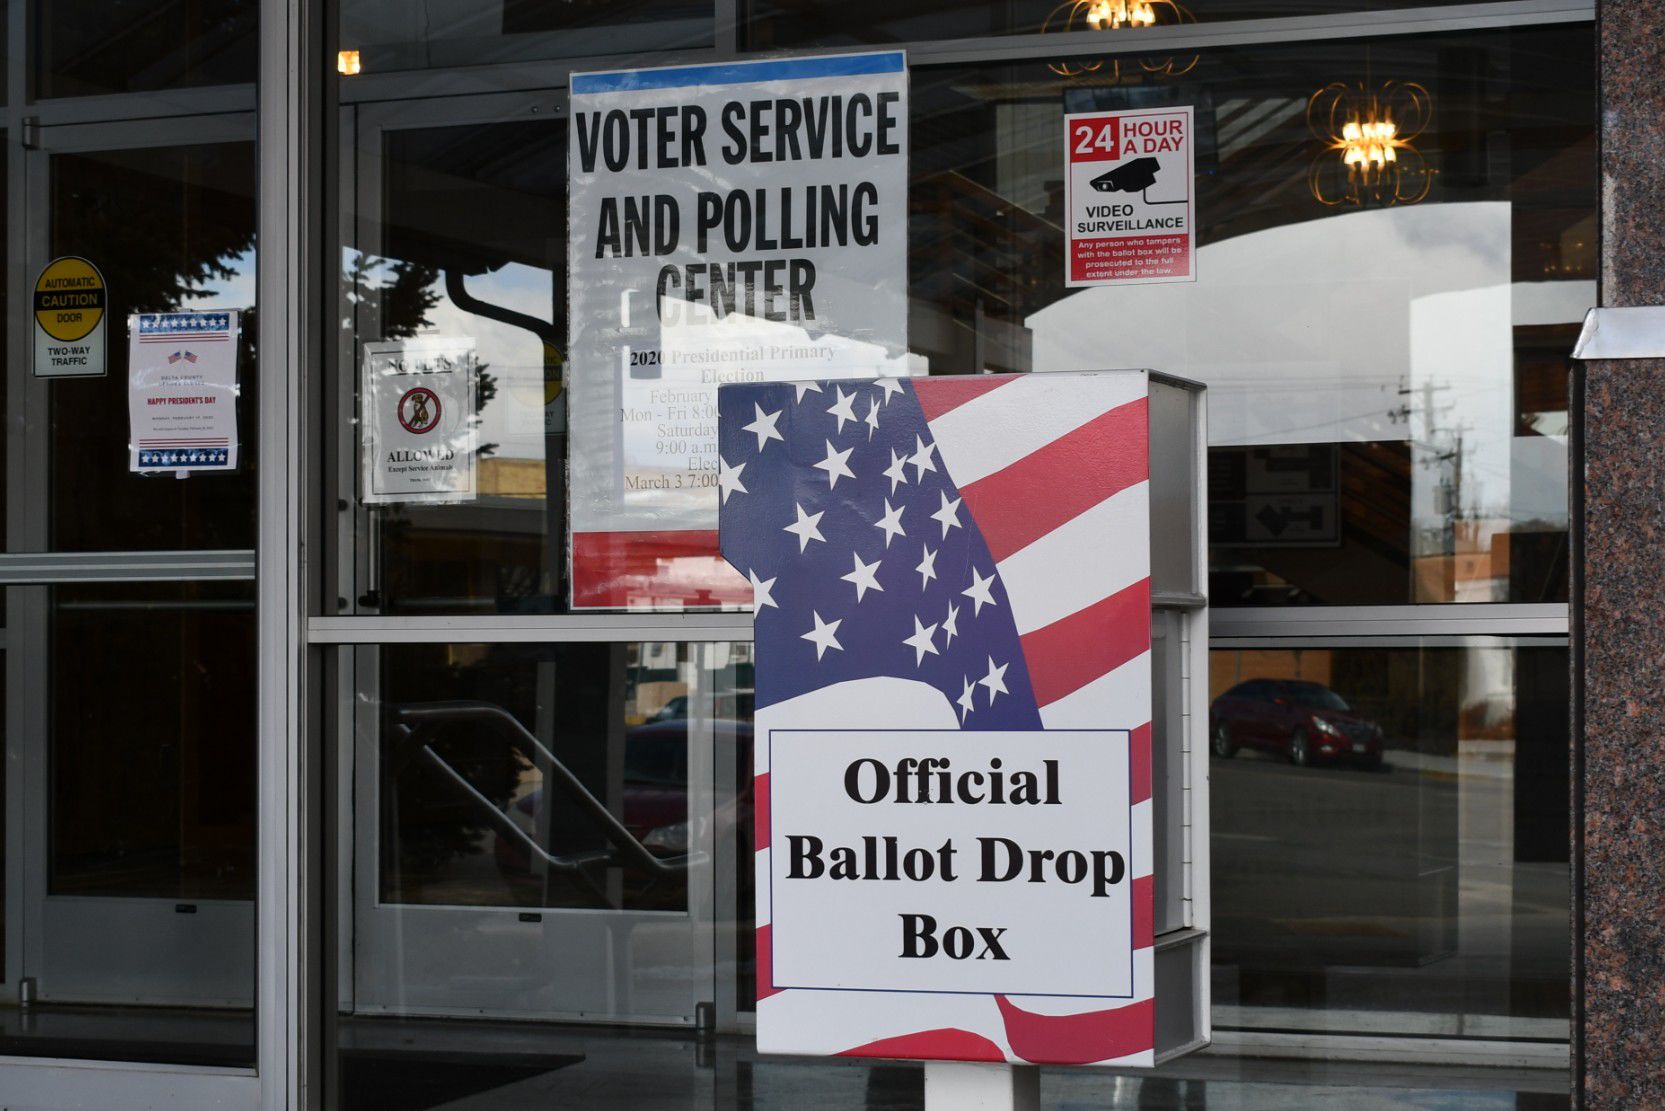 Ballots for municipal elections due today by 7 p.m.